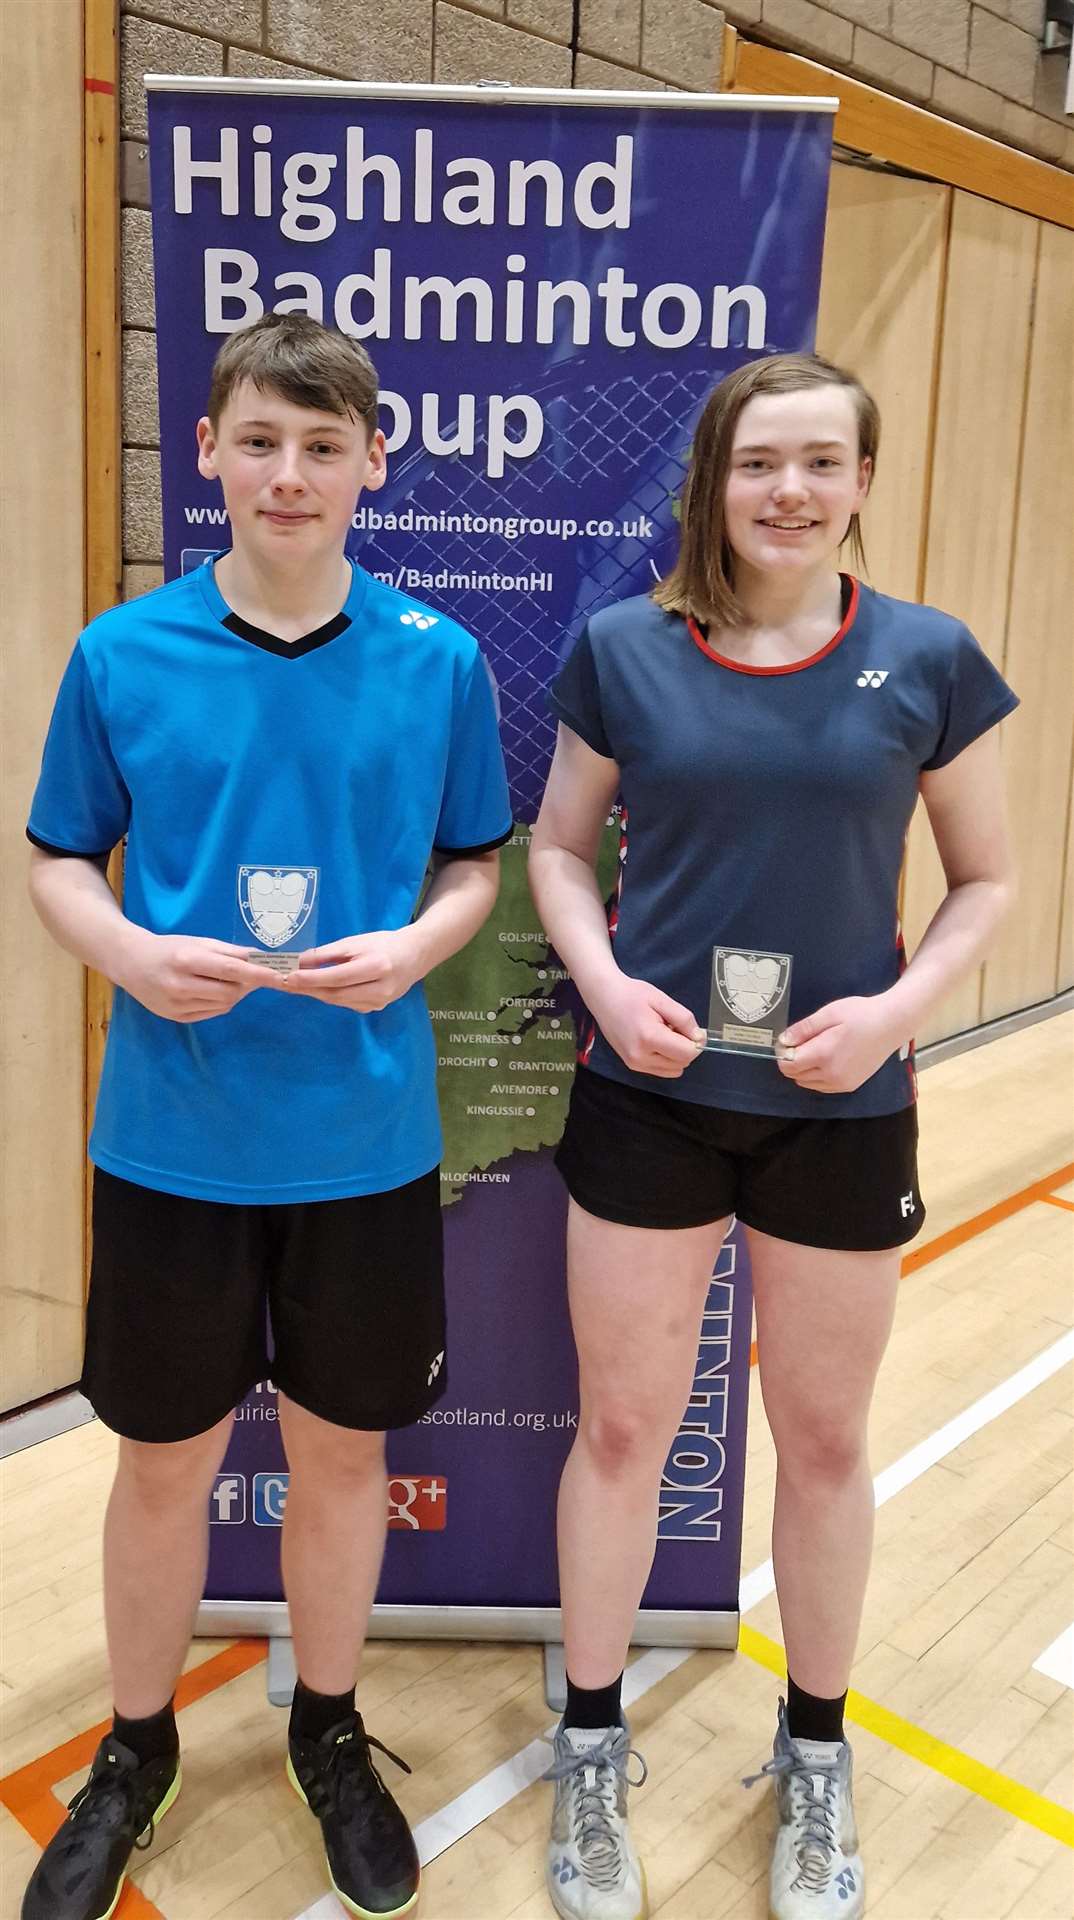 Callum McWhirter (left) and Sophie Mackenzie both won clean sweeps in the Highland tournament.